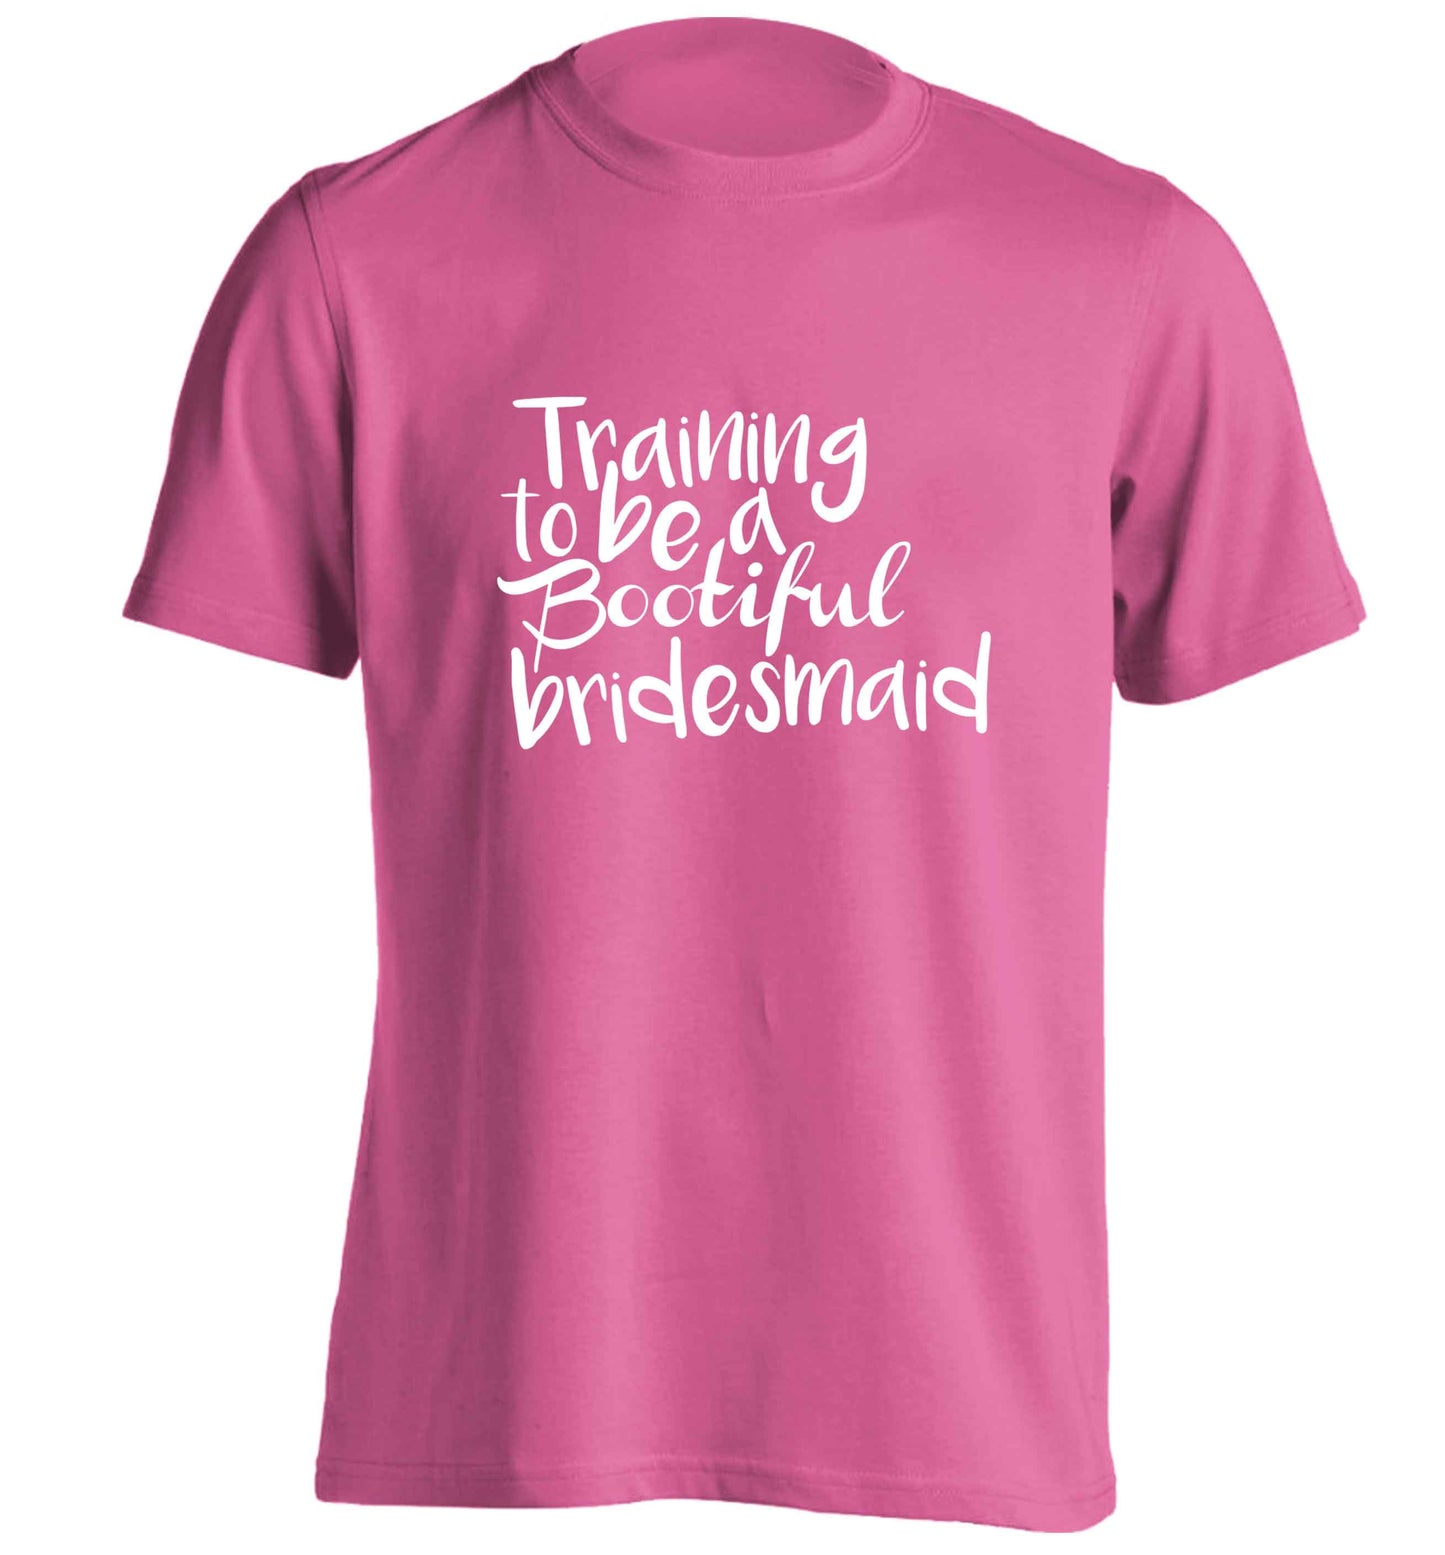 Get motivated and get fit for your big day! Our workout quotes and designs will get you ready to sweat! Perfect for any bride, groom or bridesmaid to be!  adults unisex pink Tshirt 2XL